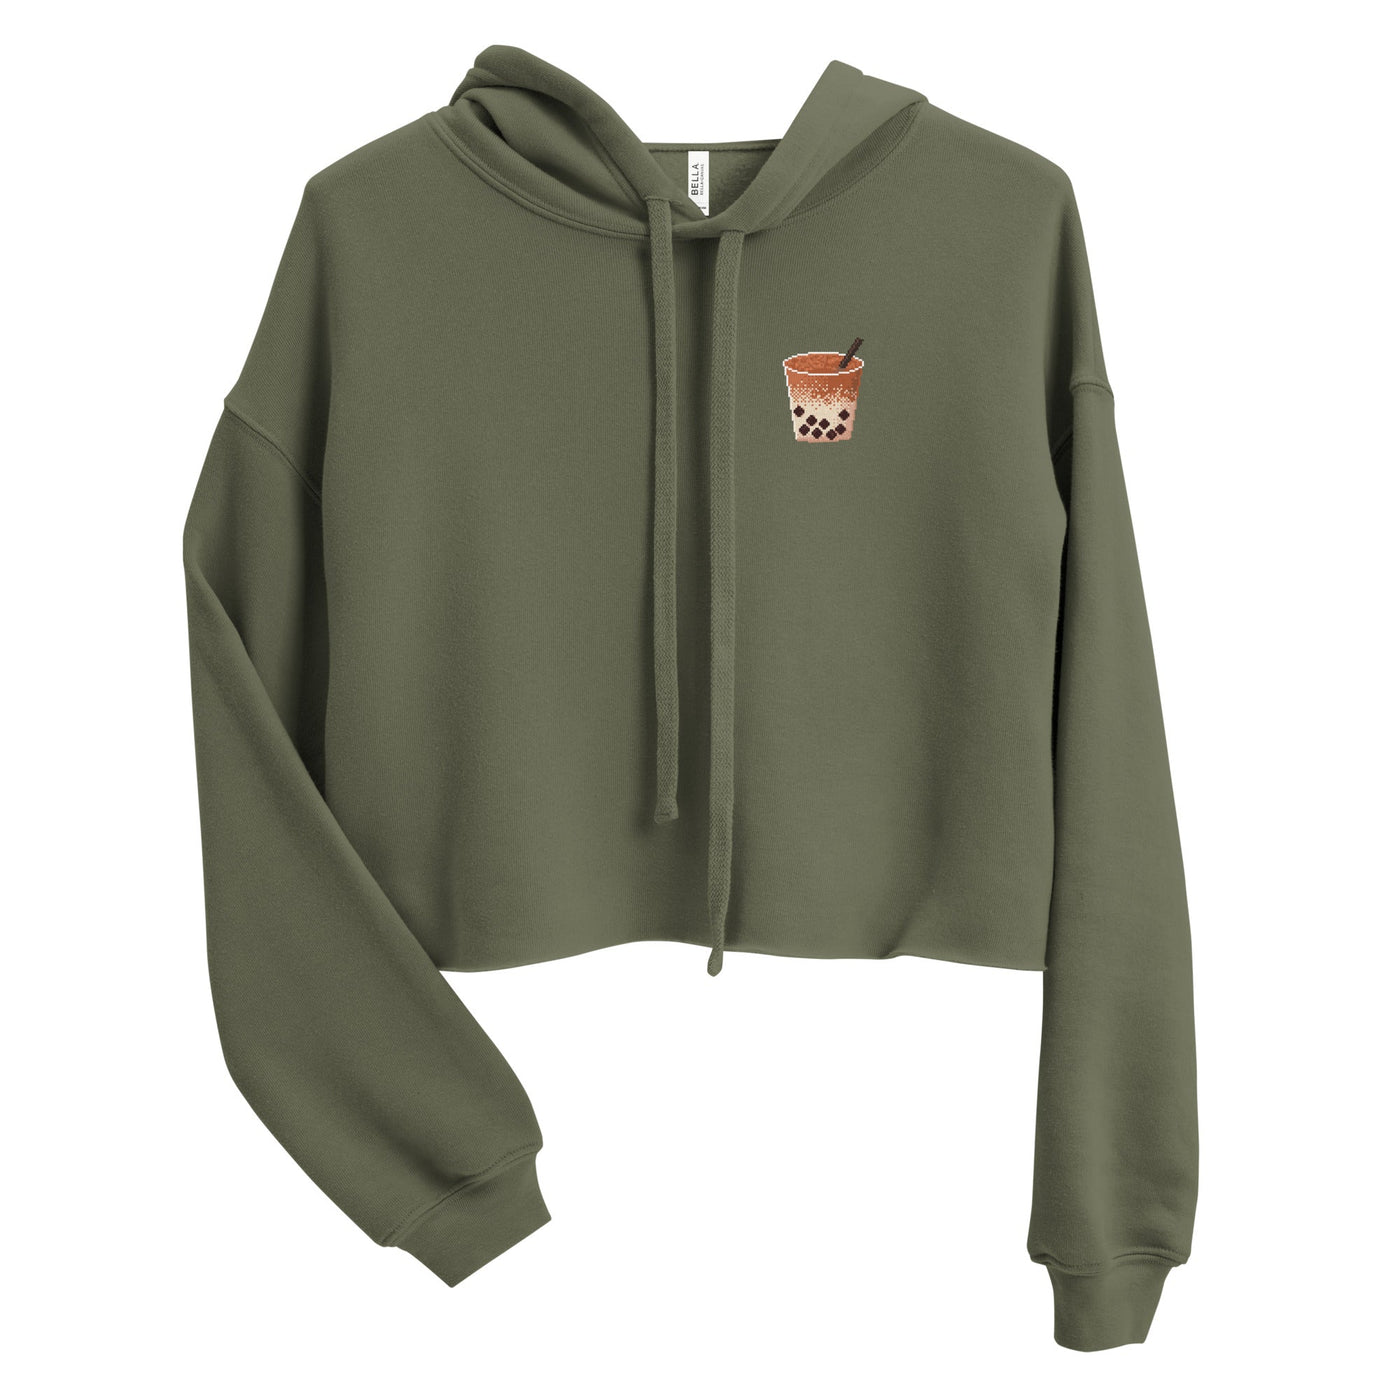 Pixel Boba | Crop Hoodie | Cozy Gamer Threads and Thistles Inventory Military Green S 